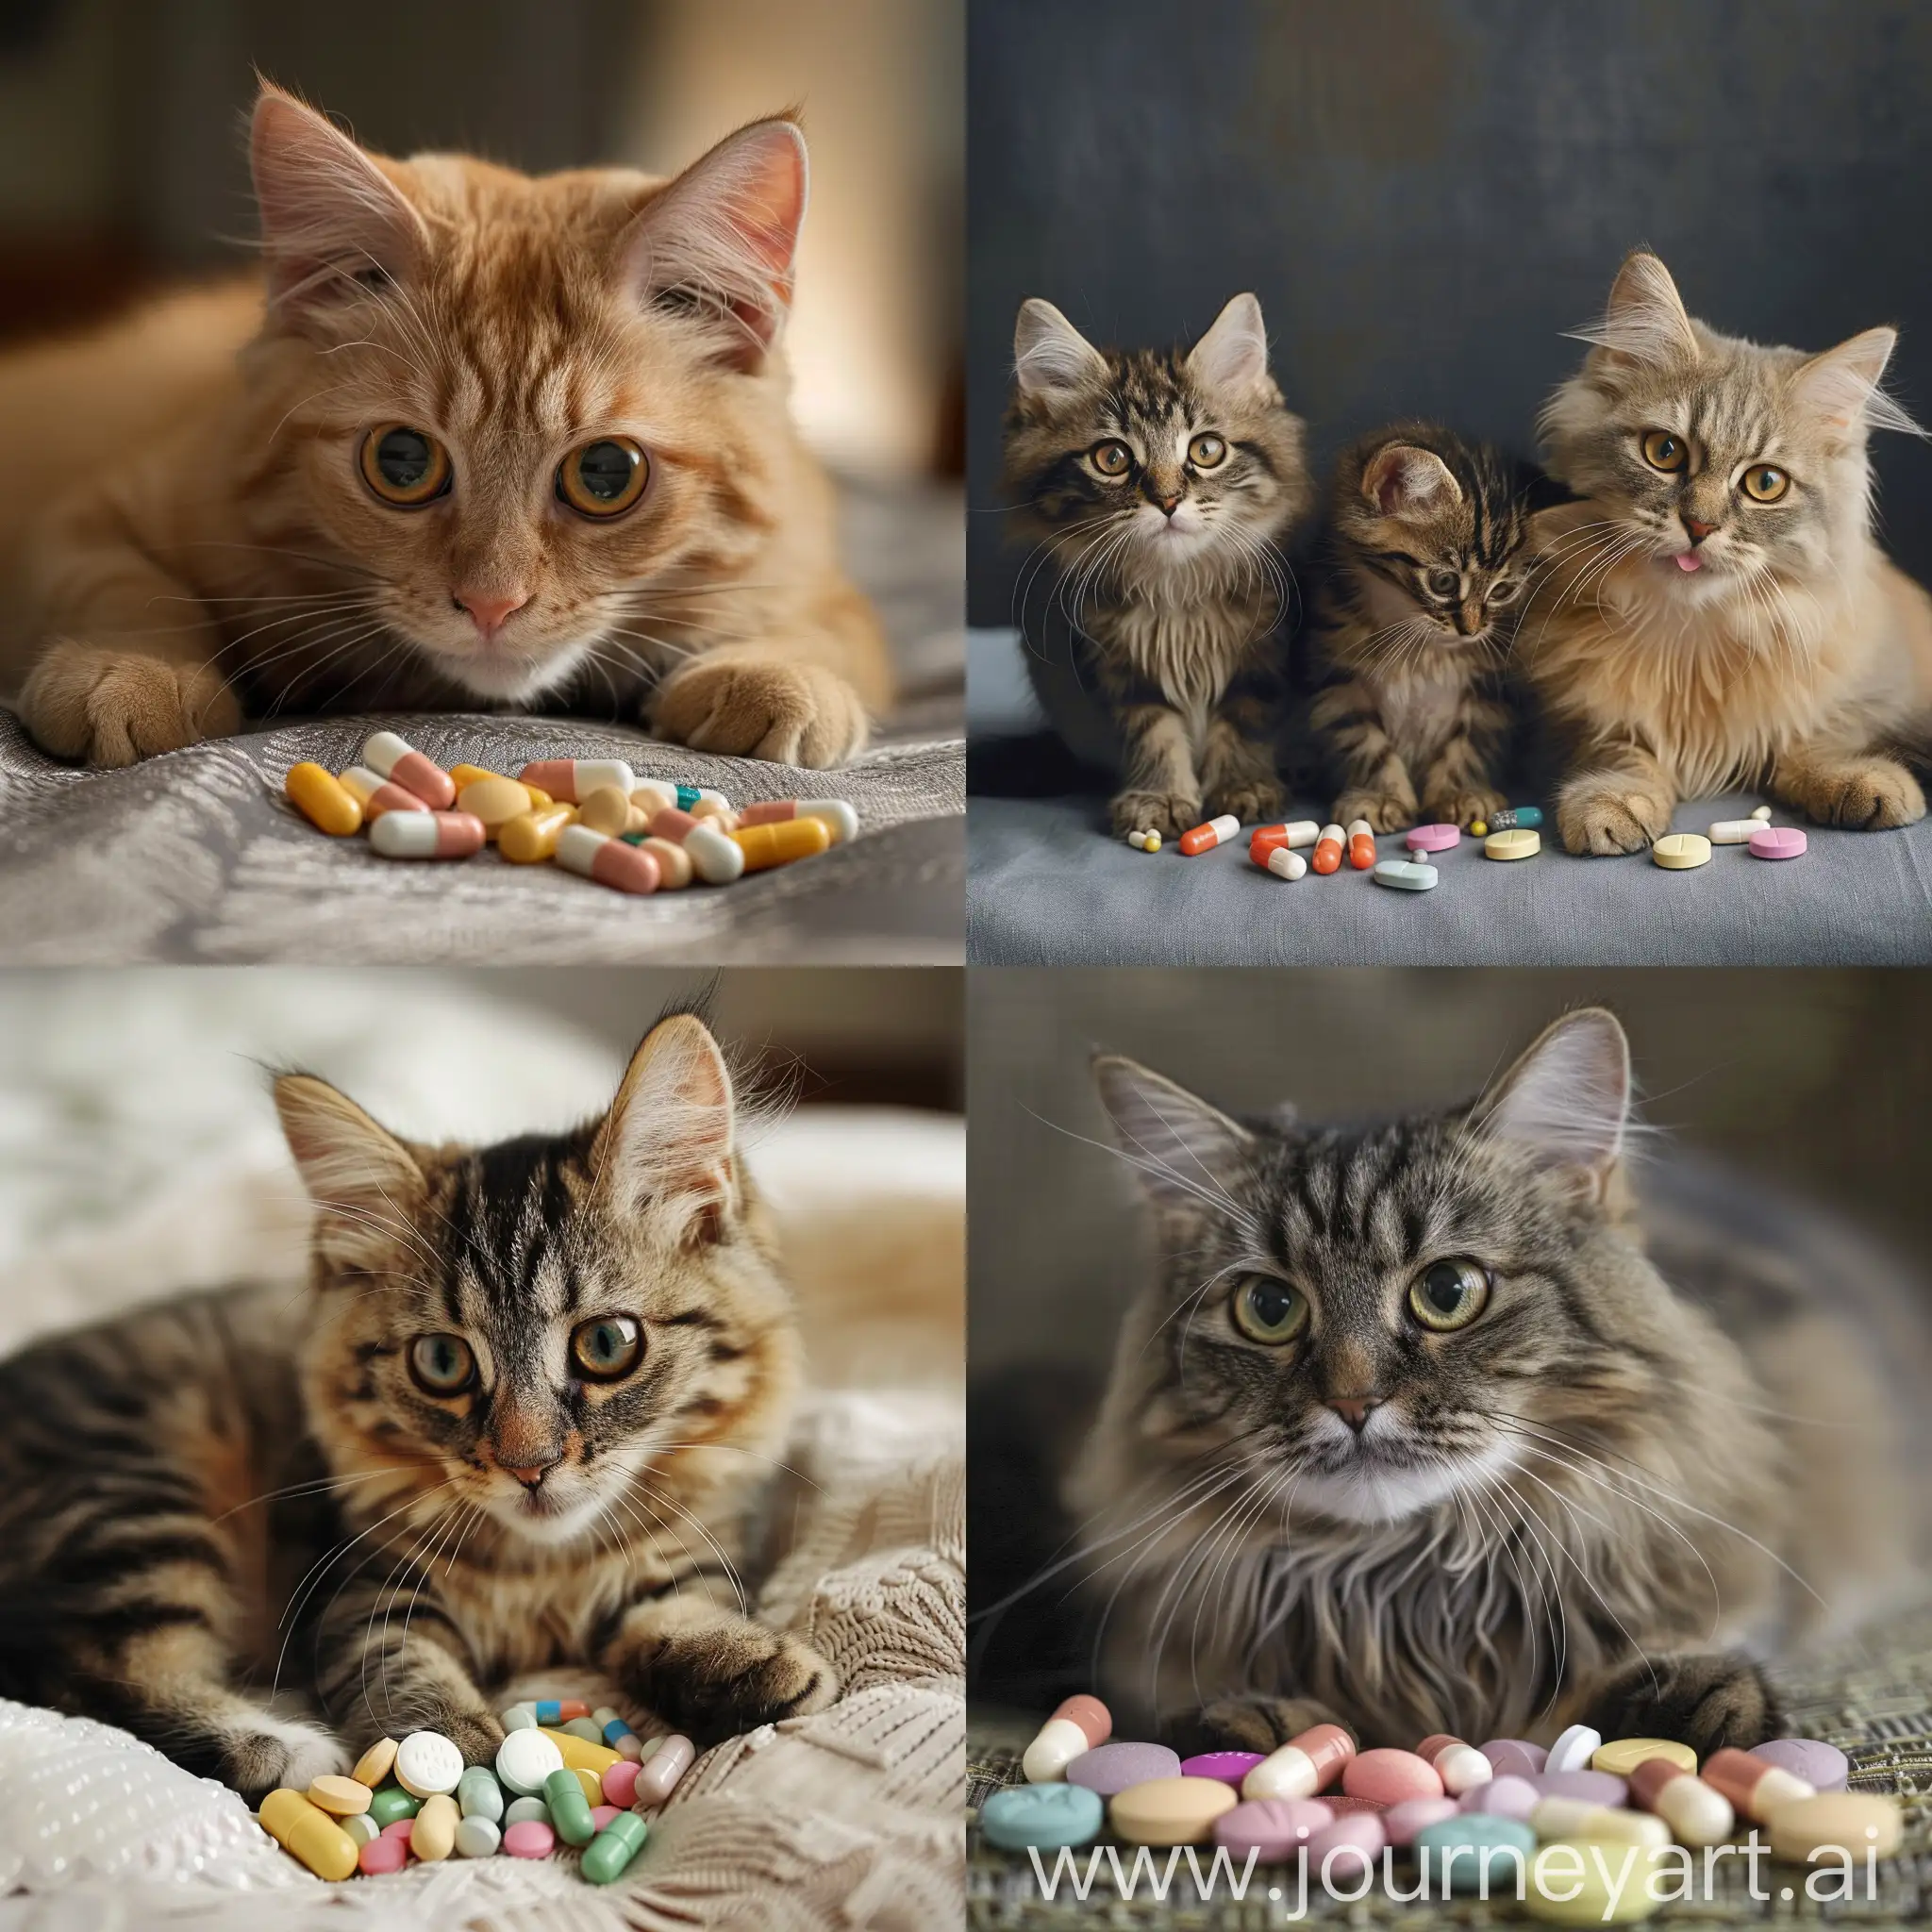 Playful-Kittens-with-Colorful-Pills